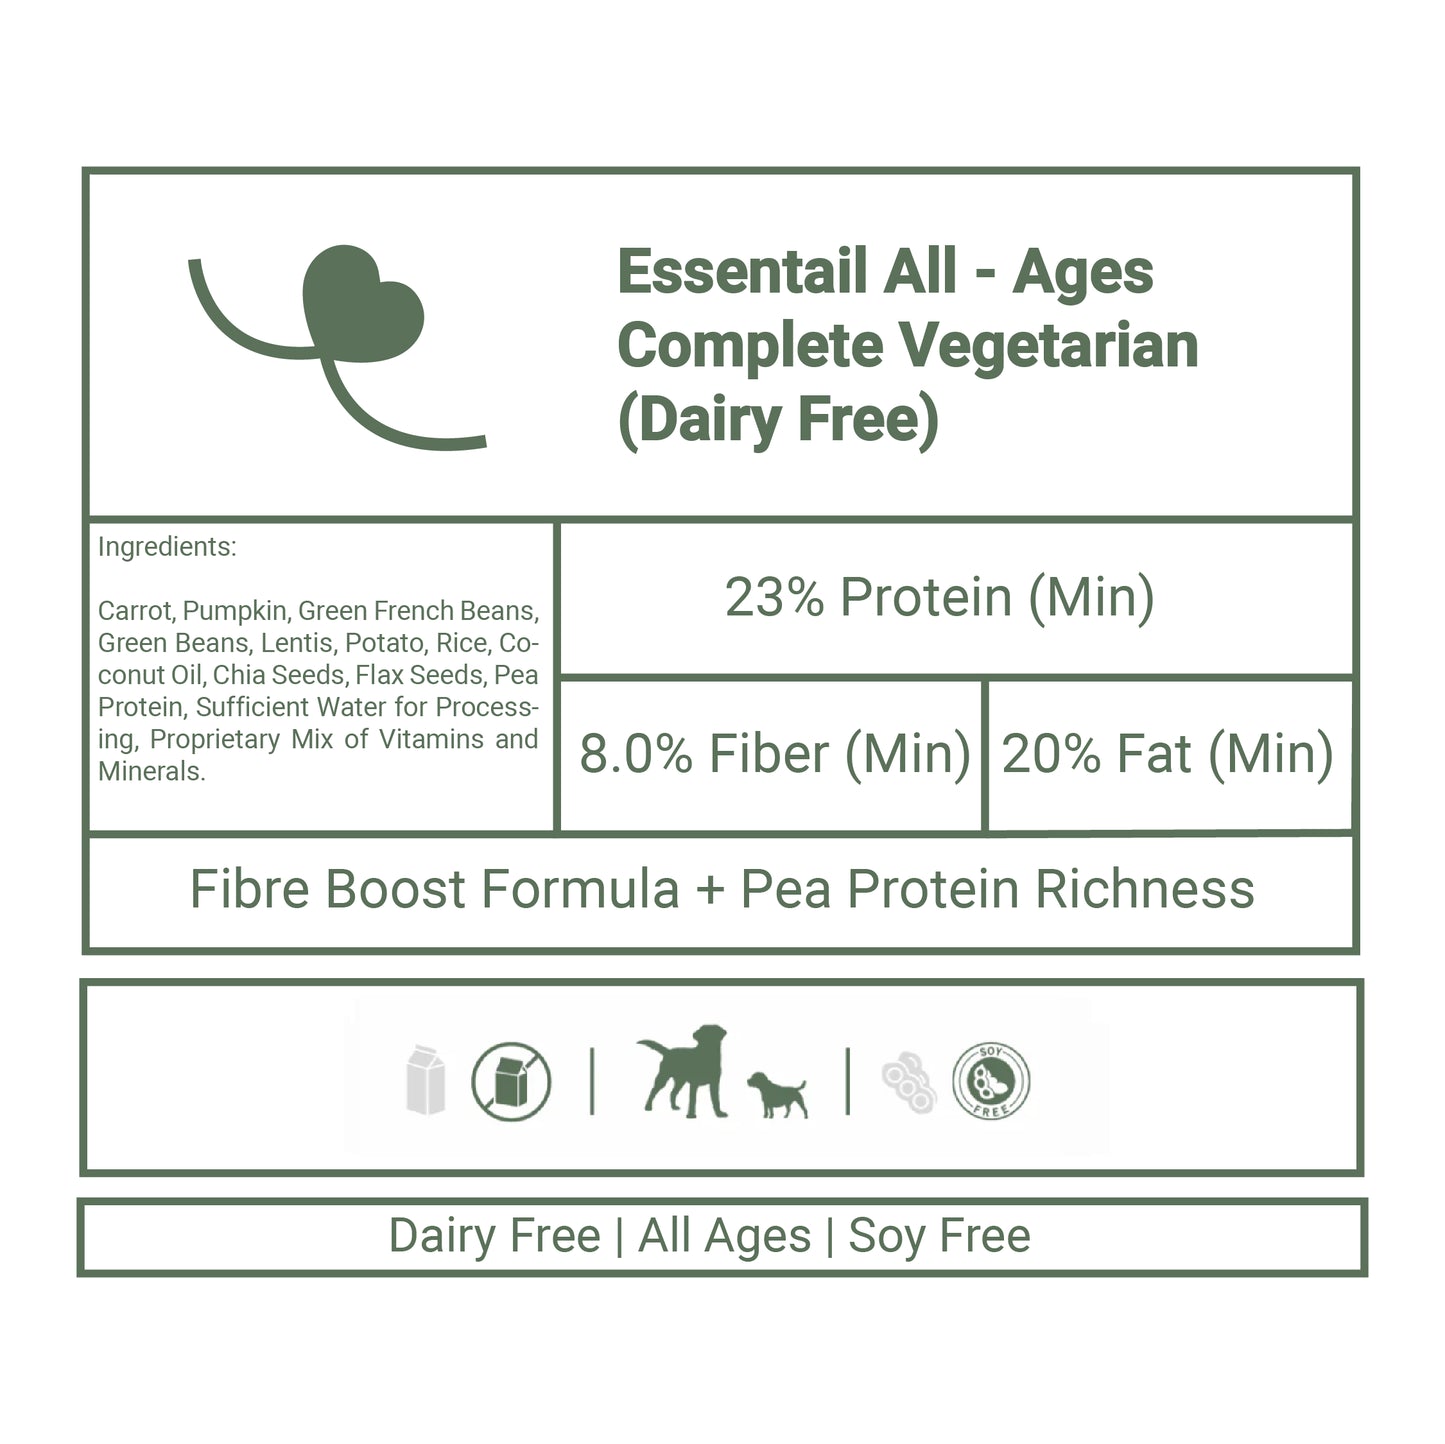 Essential All Ages Complete Vegetarian (Dairy Free)